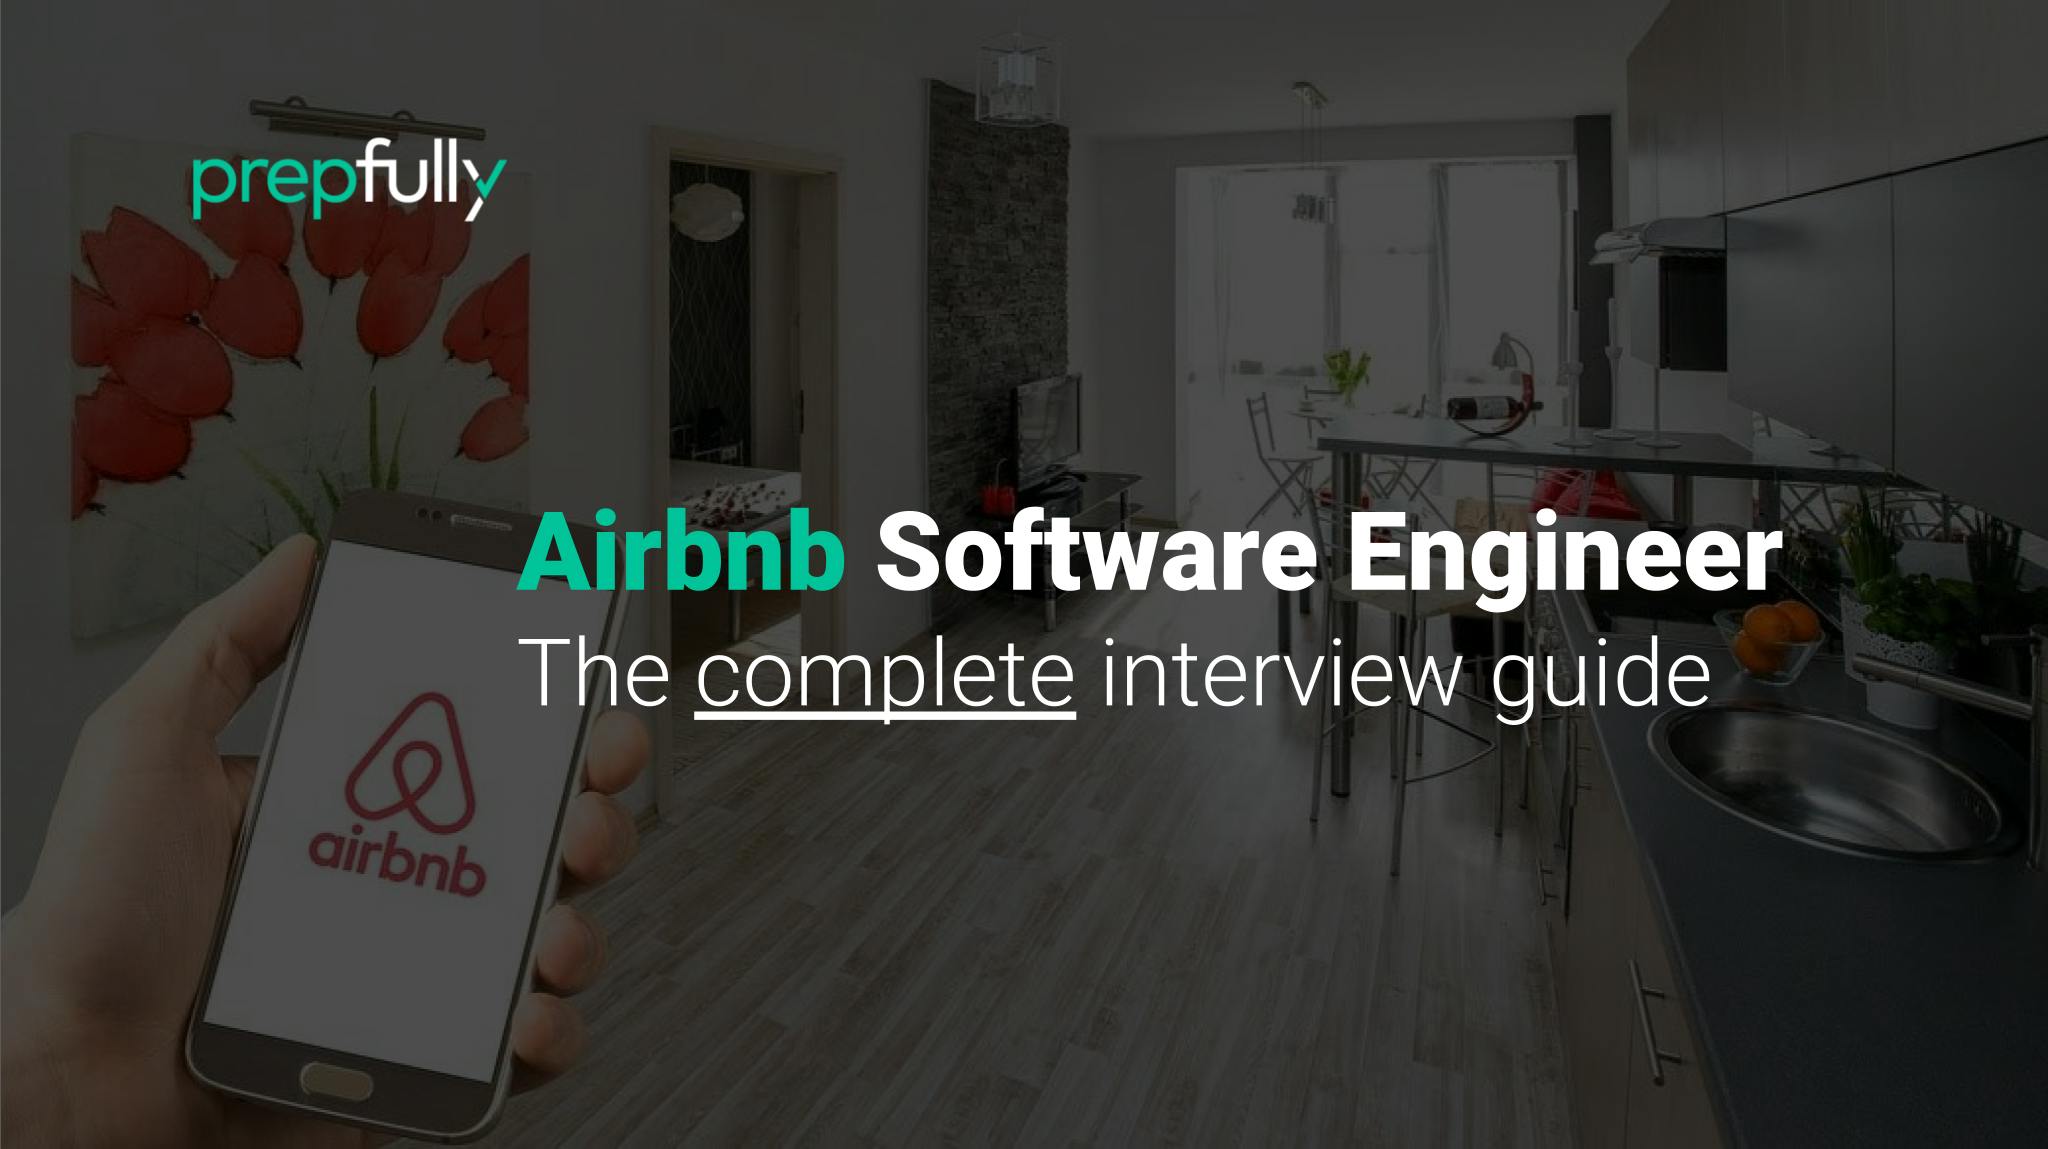 Interview guide for Airbnb Software Engineer